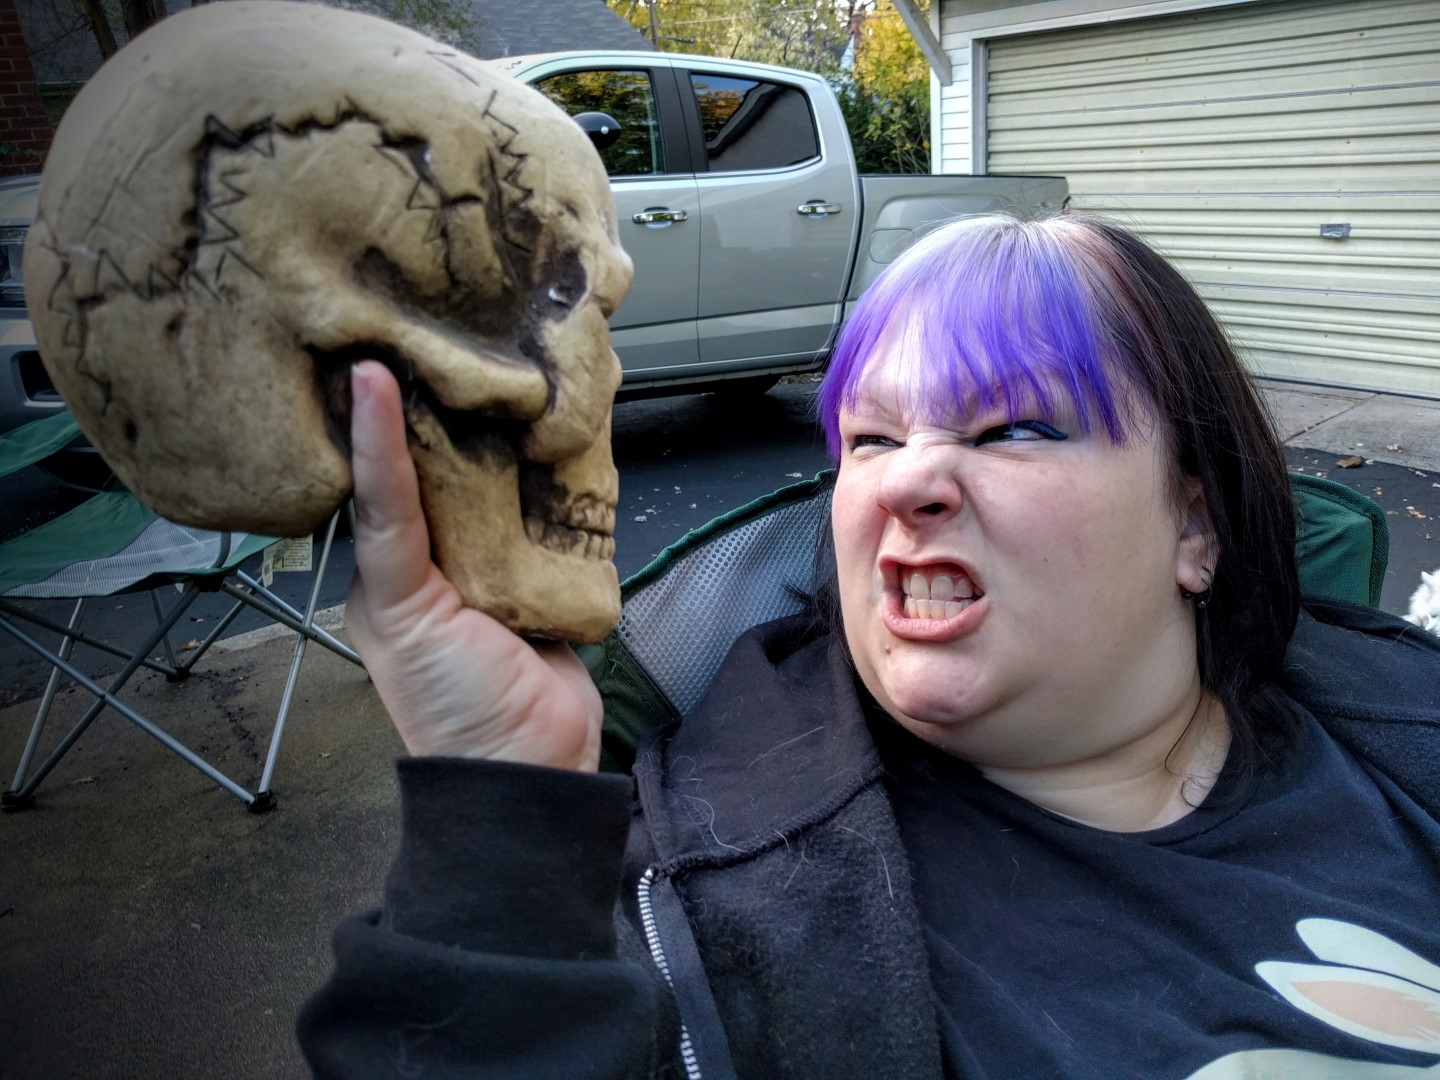 Anna stares down Skully